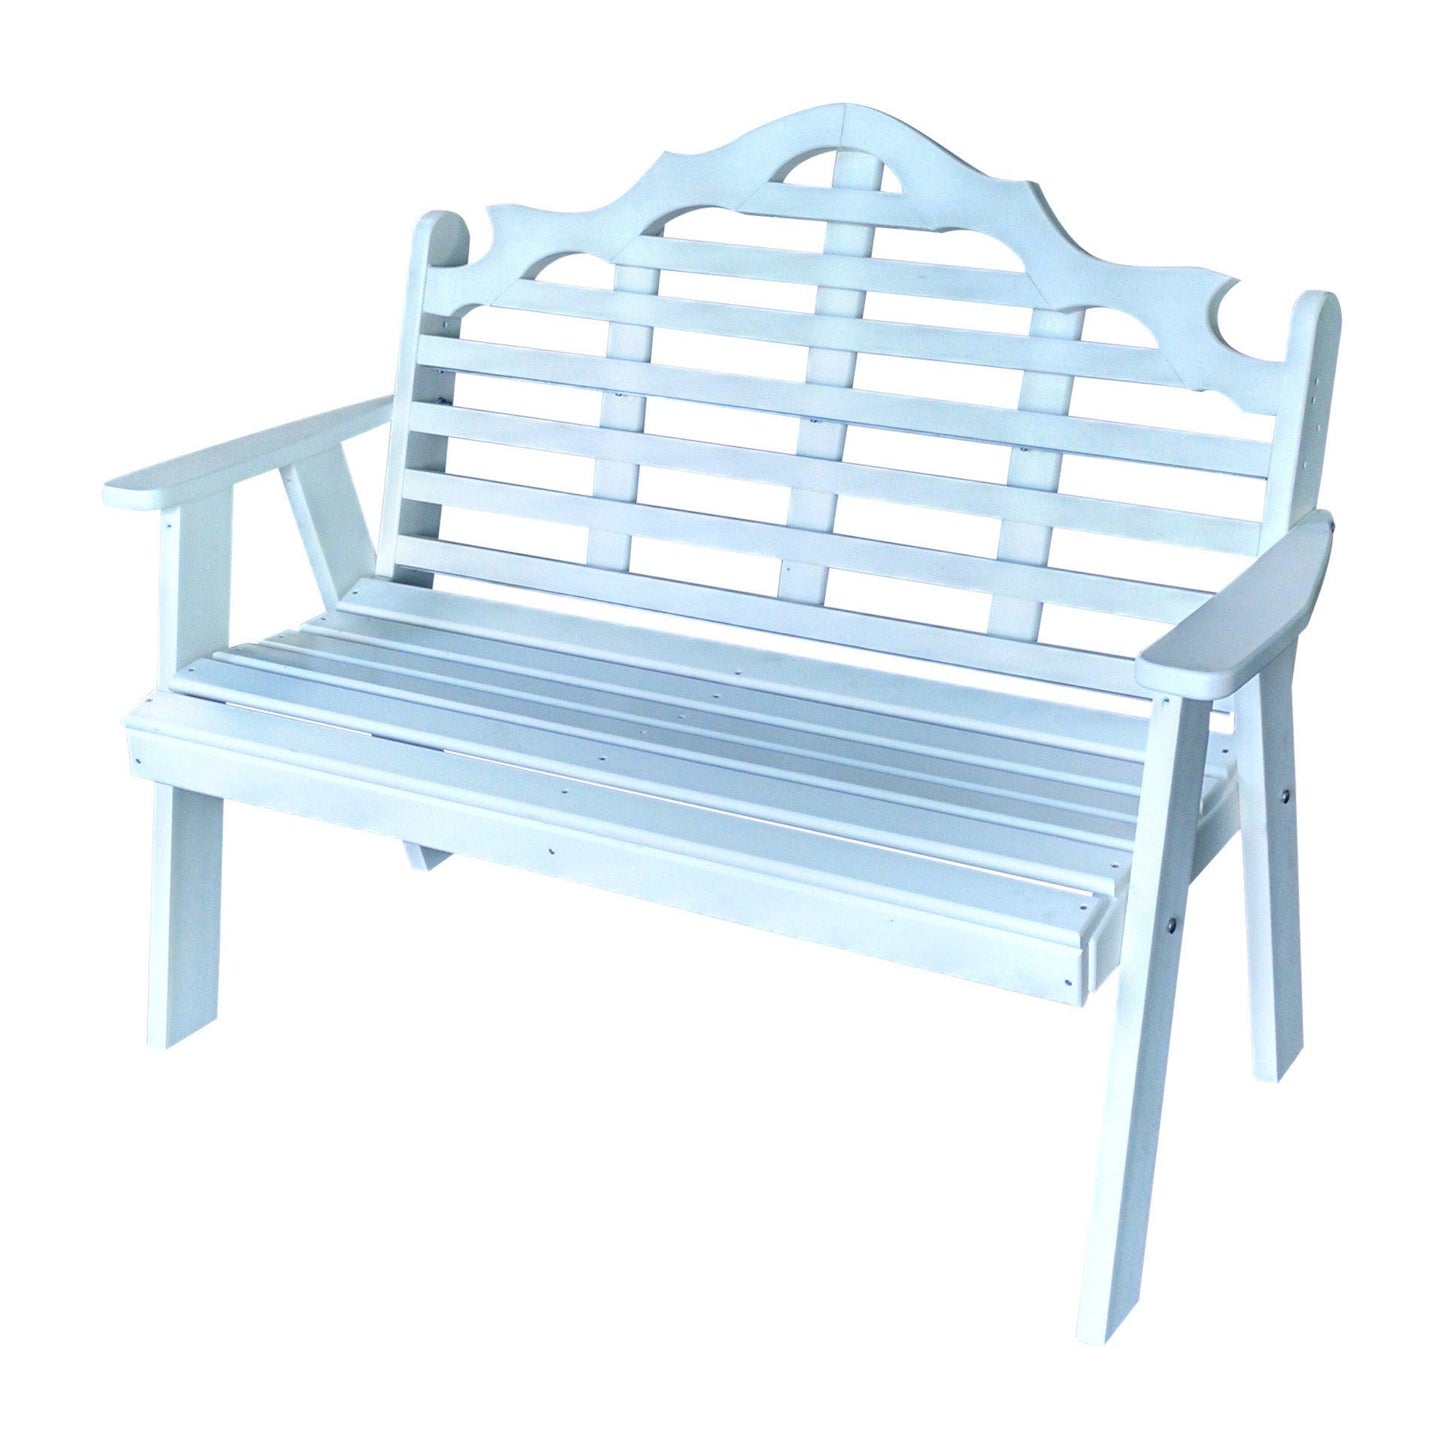 A&L Furniture Company Recycled Plastic 4'  Marlboro Garden Bench - LEAD TIME TO SHIP 10 BUSINESS DAYS